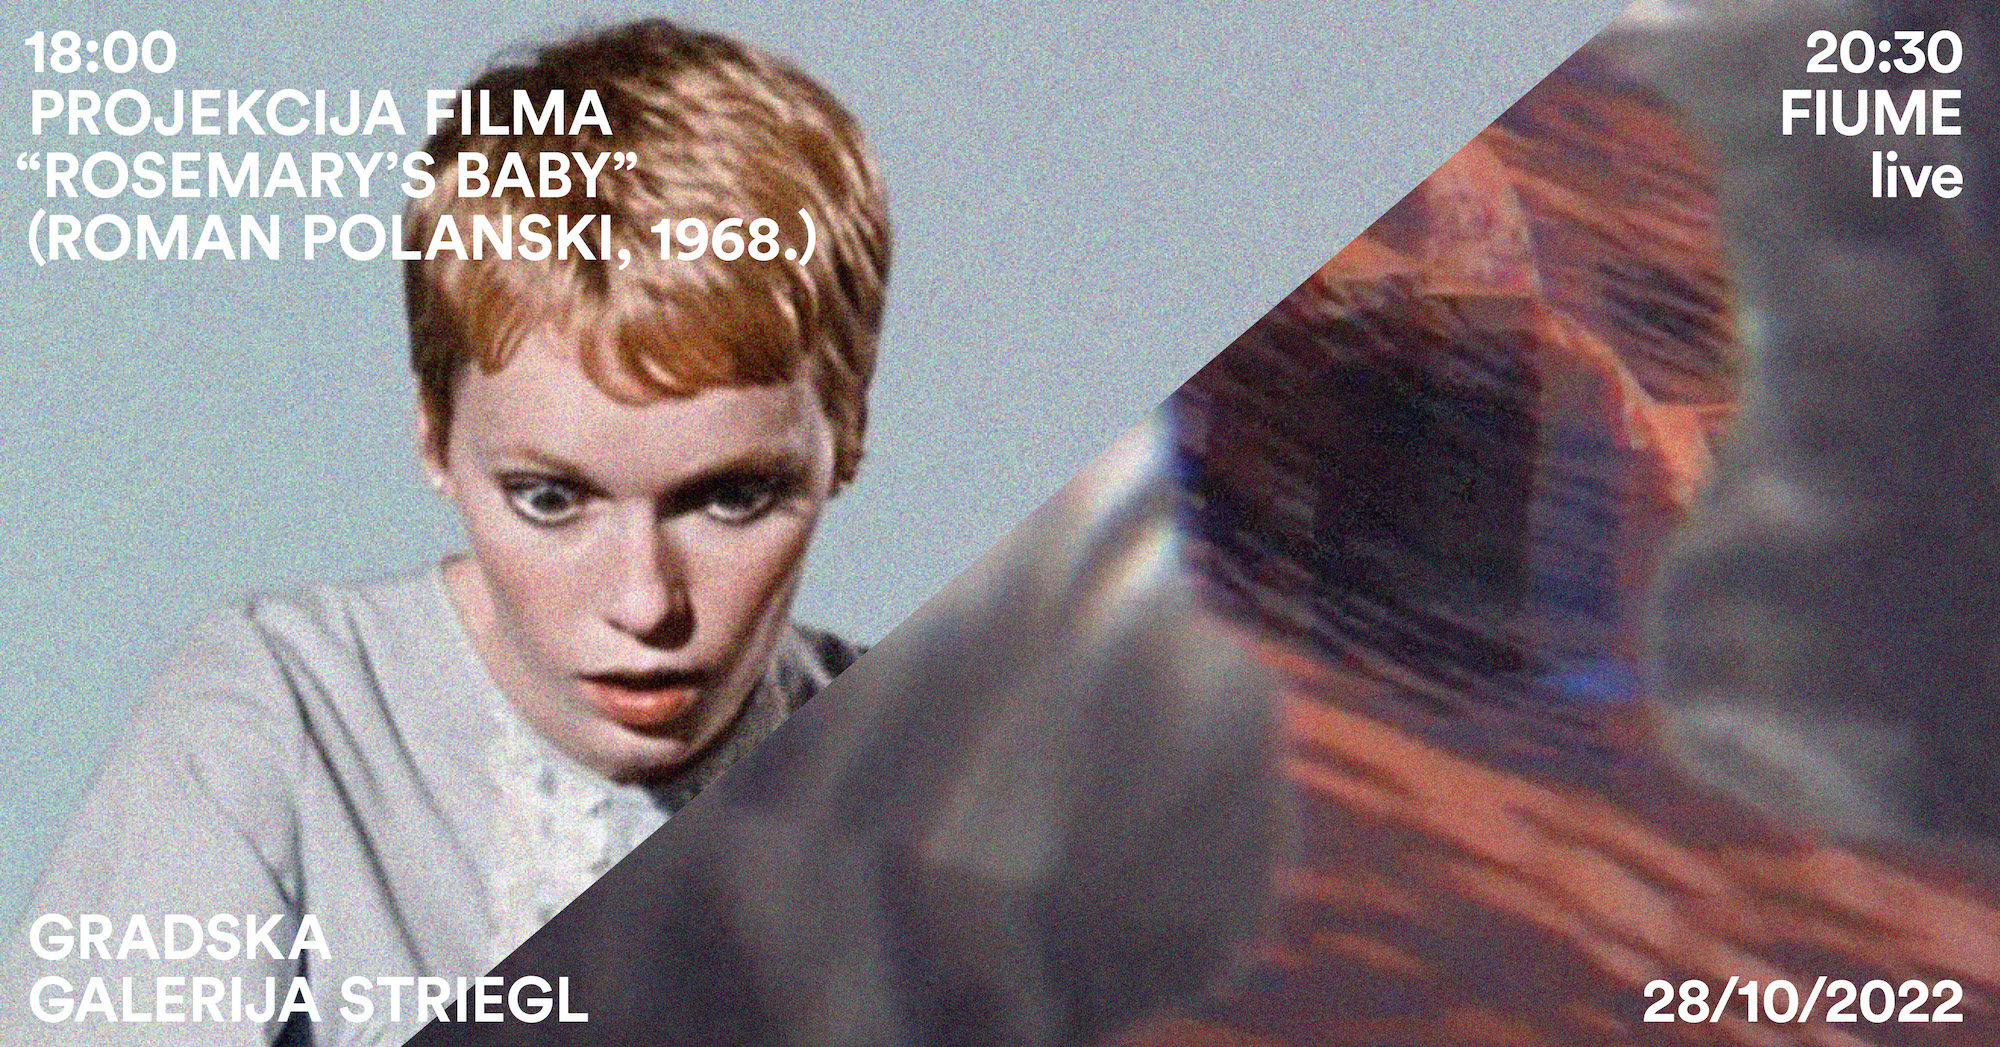 You are currently viewing Halloween Warm up: Rosemary’s Baby/FIUME live